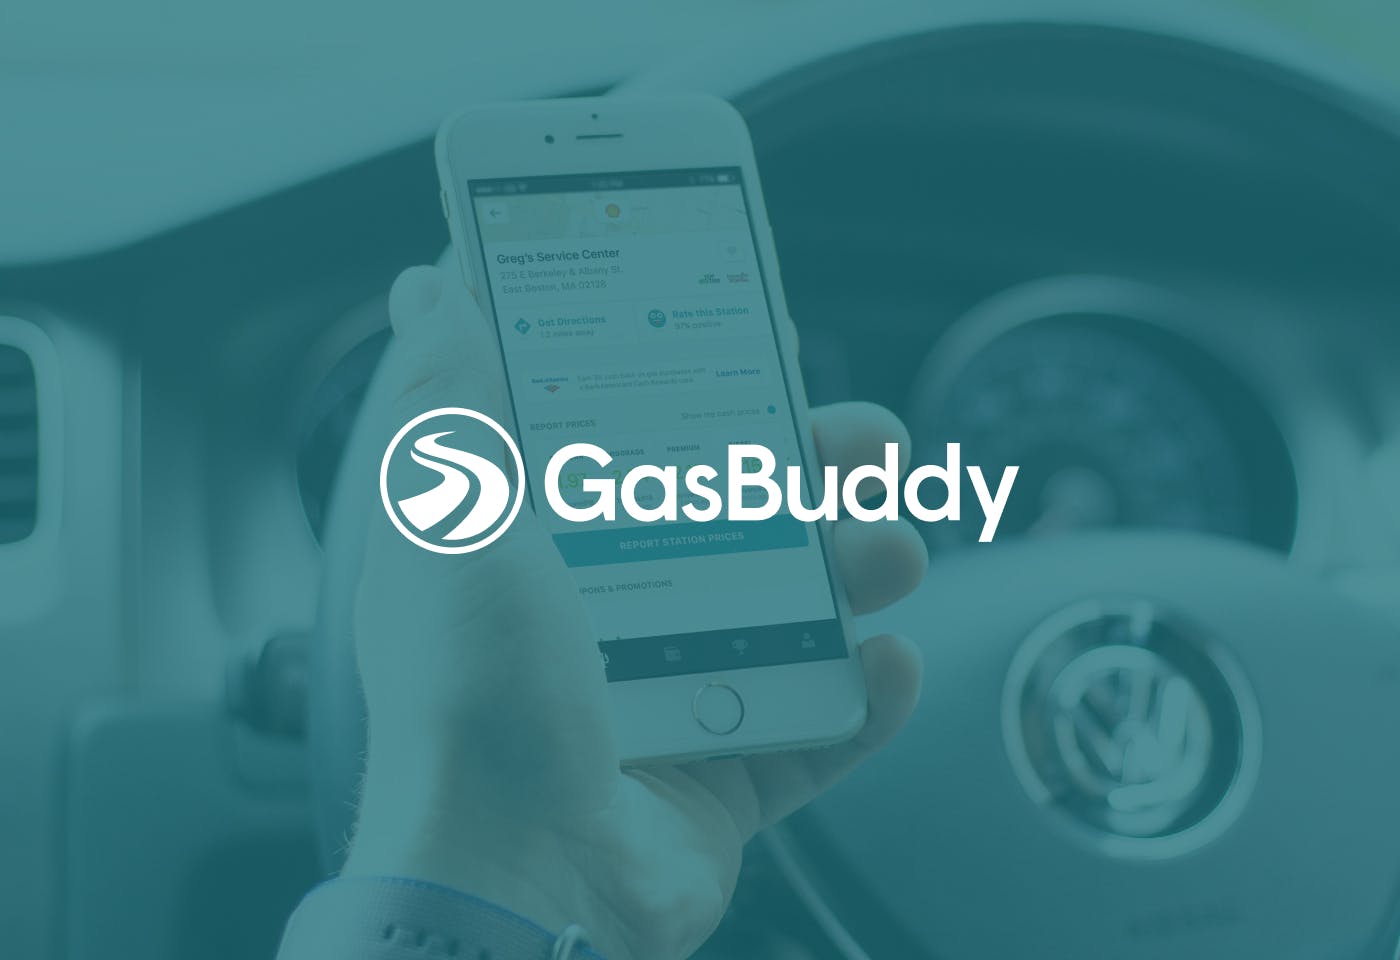 The GasBuddy logo on a dark teal background with a photo of someone holding a phone in front of a car steering wheel.